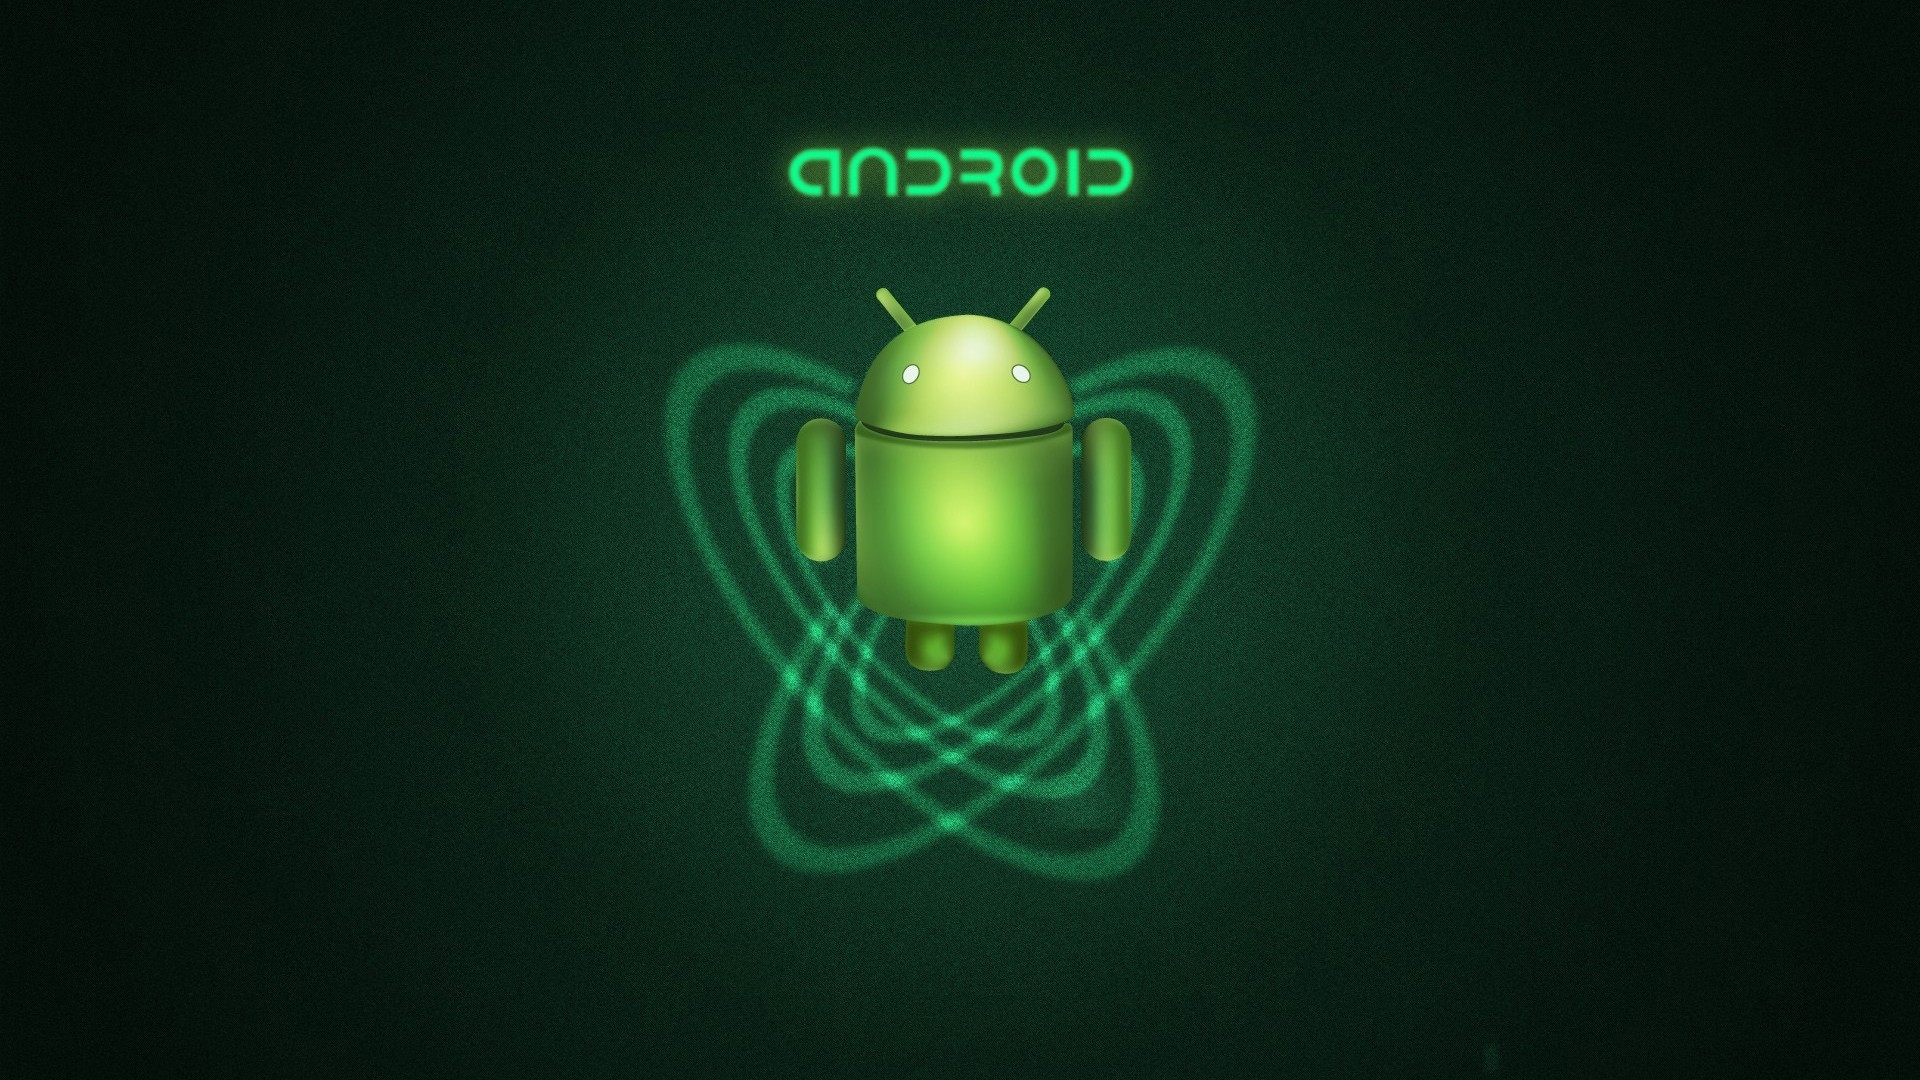 Android Mascot for 1920 x 1080 HDTV 1080p resolution